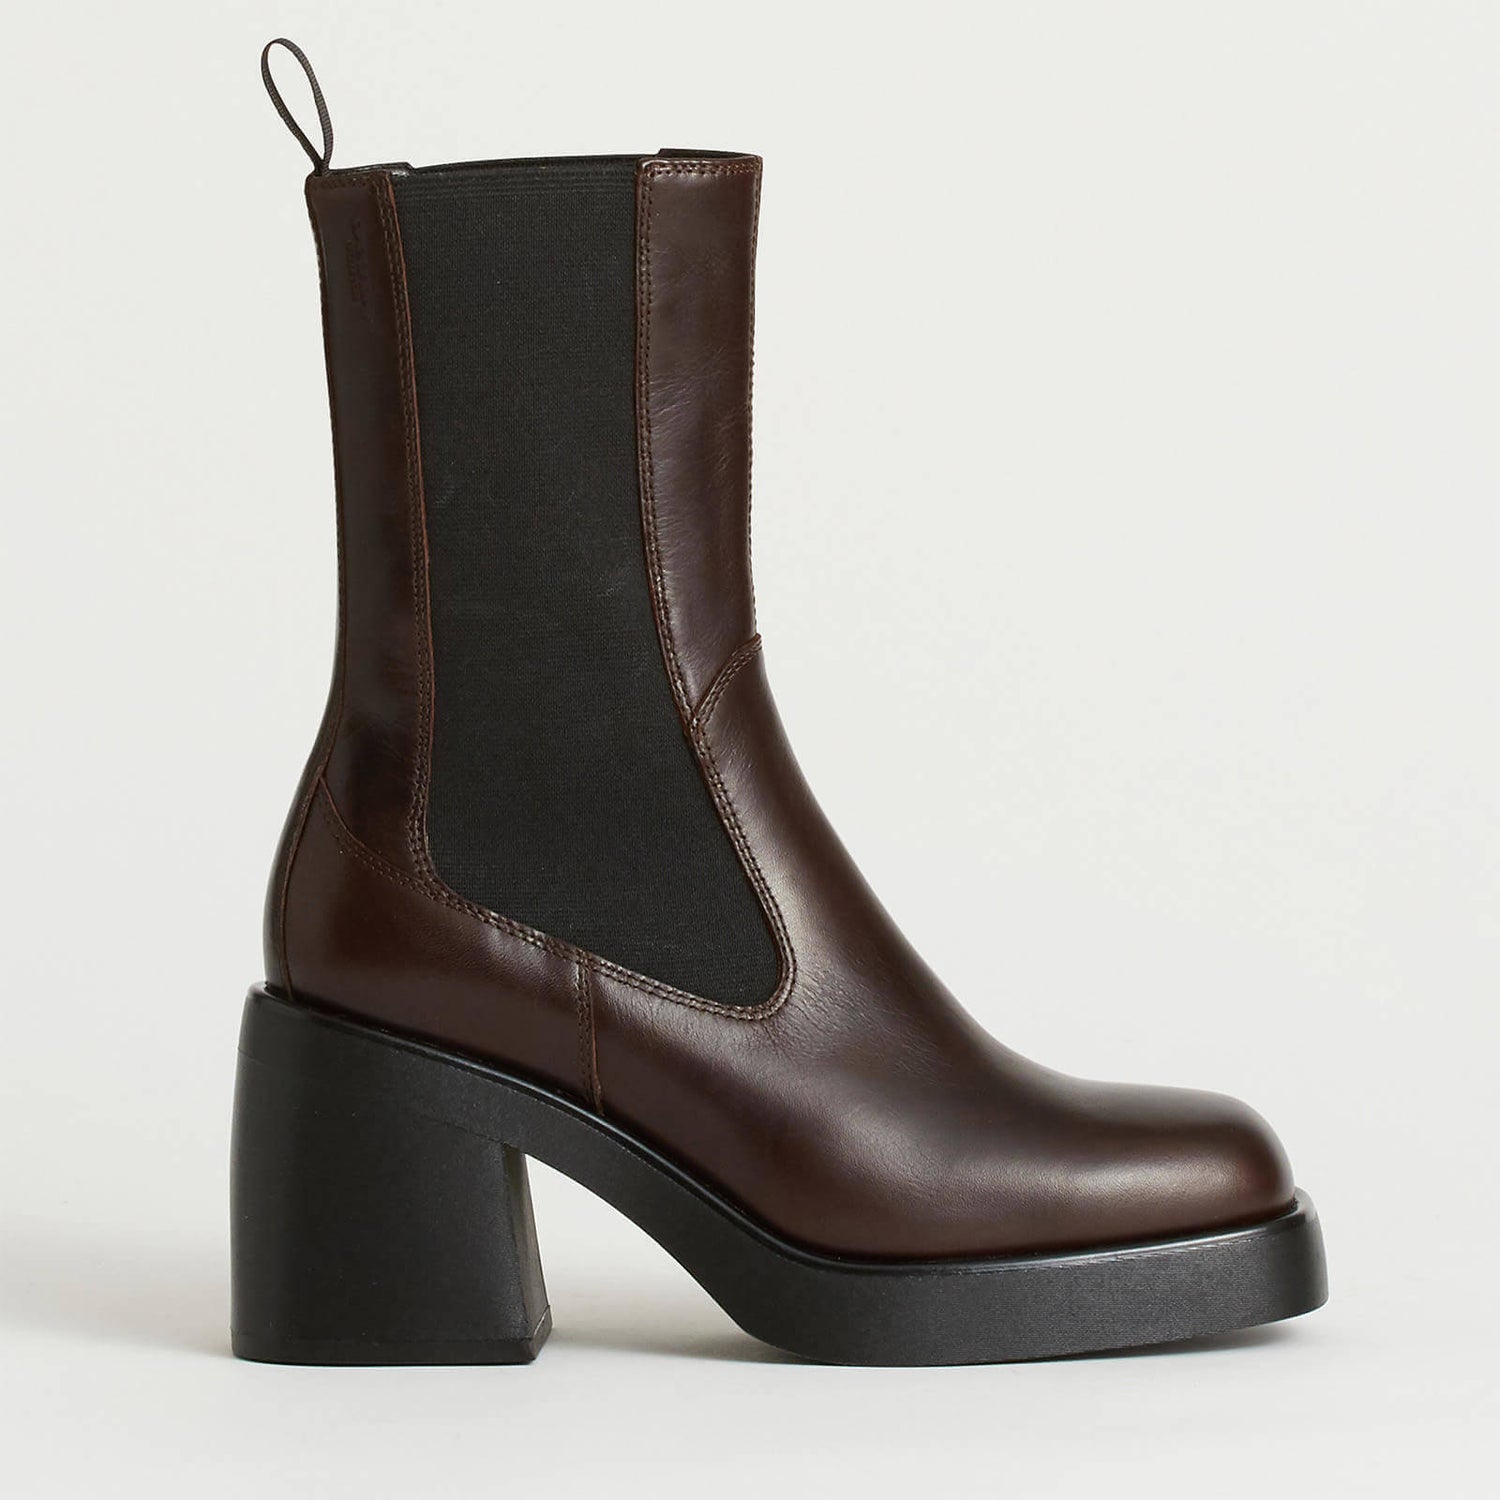 Vagabond Women's Brooke Leather Heeled Chelsea Boots - Jave